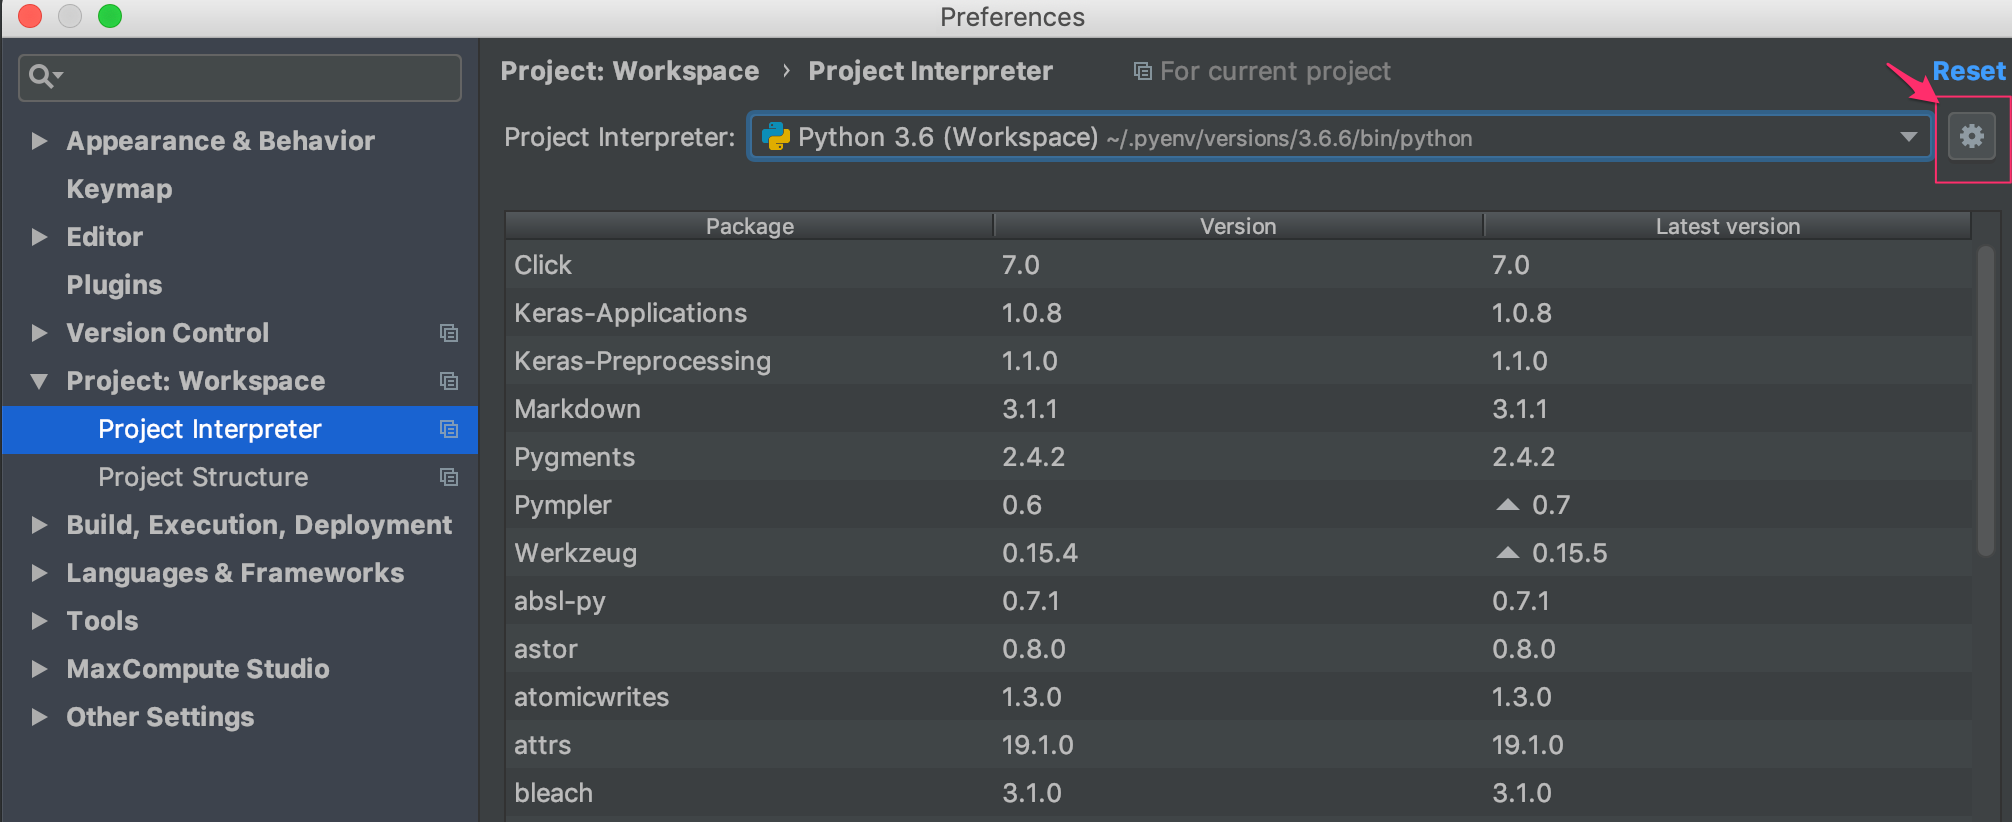 Preferences_と_Workspace____Workspace__-_____merpay-creditscore_features_composer_v20_dags_dag_prediction_py__Workspace_.png